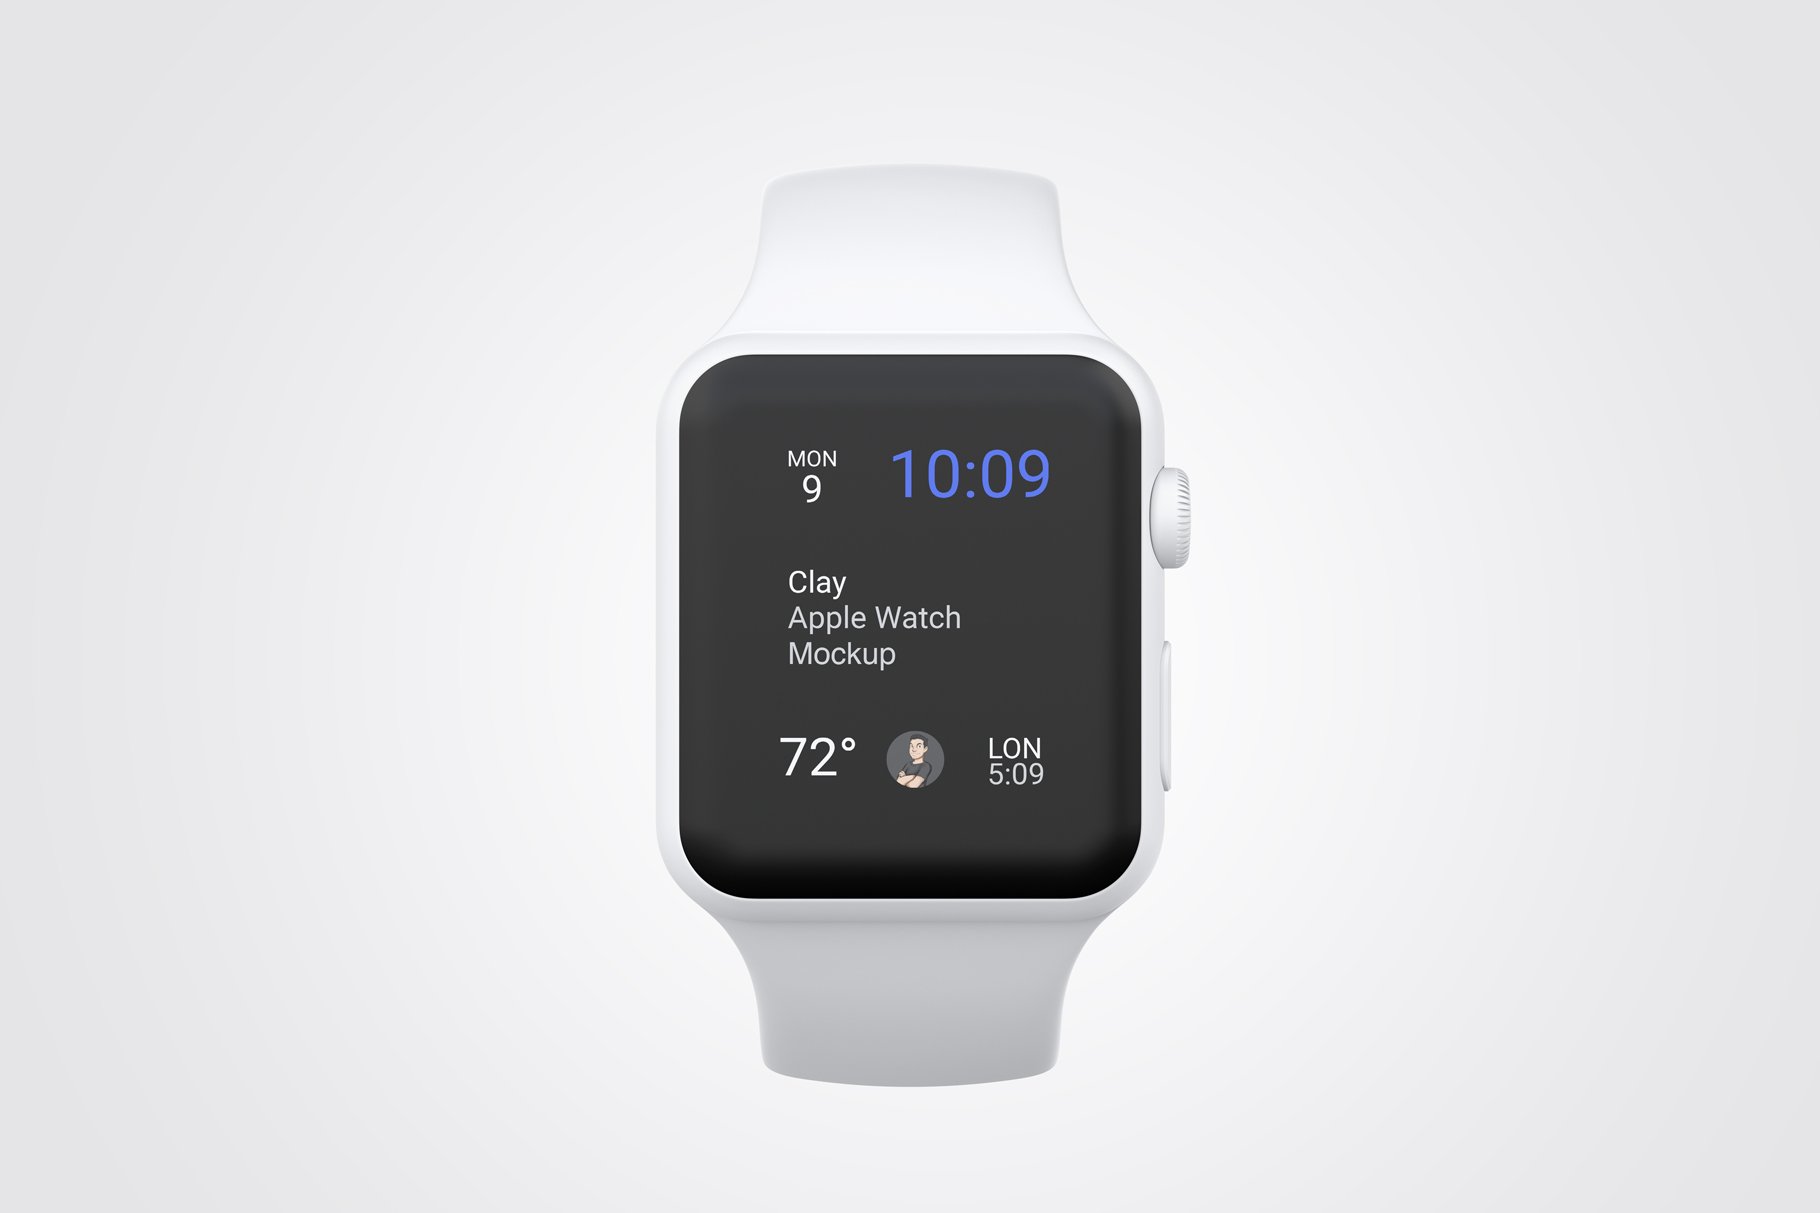 Clay Apple Watch Mockup 04 cover image.